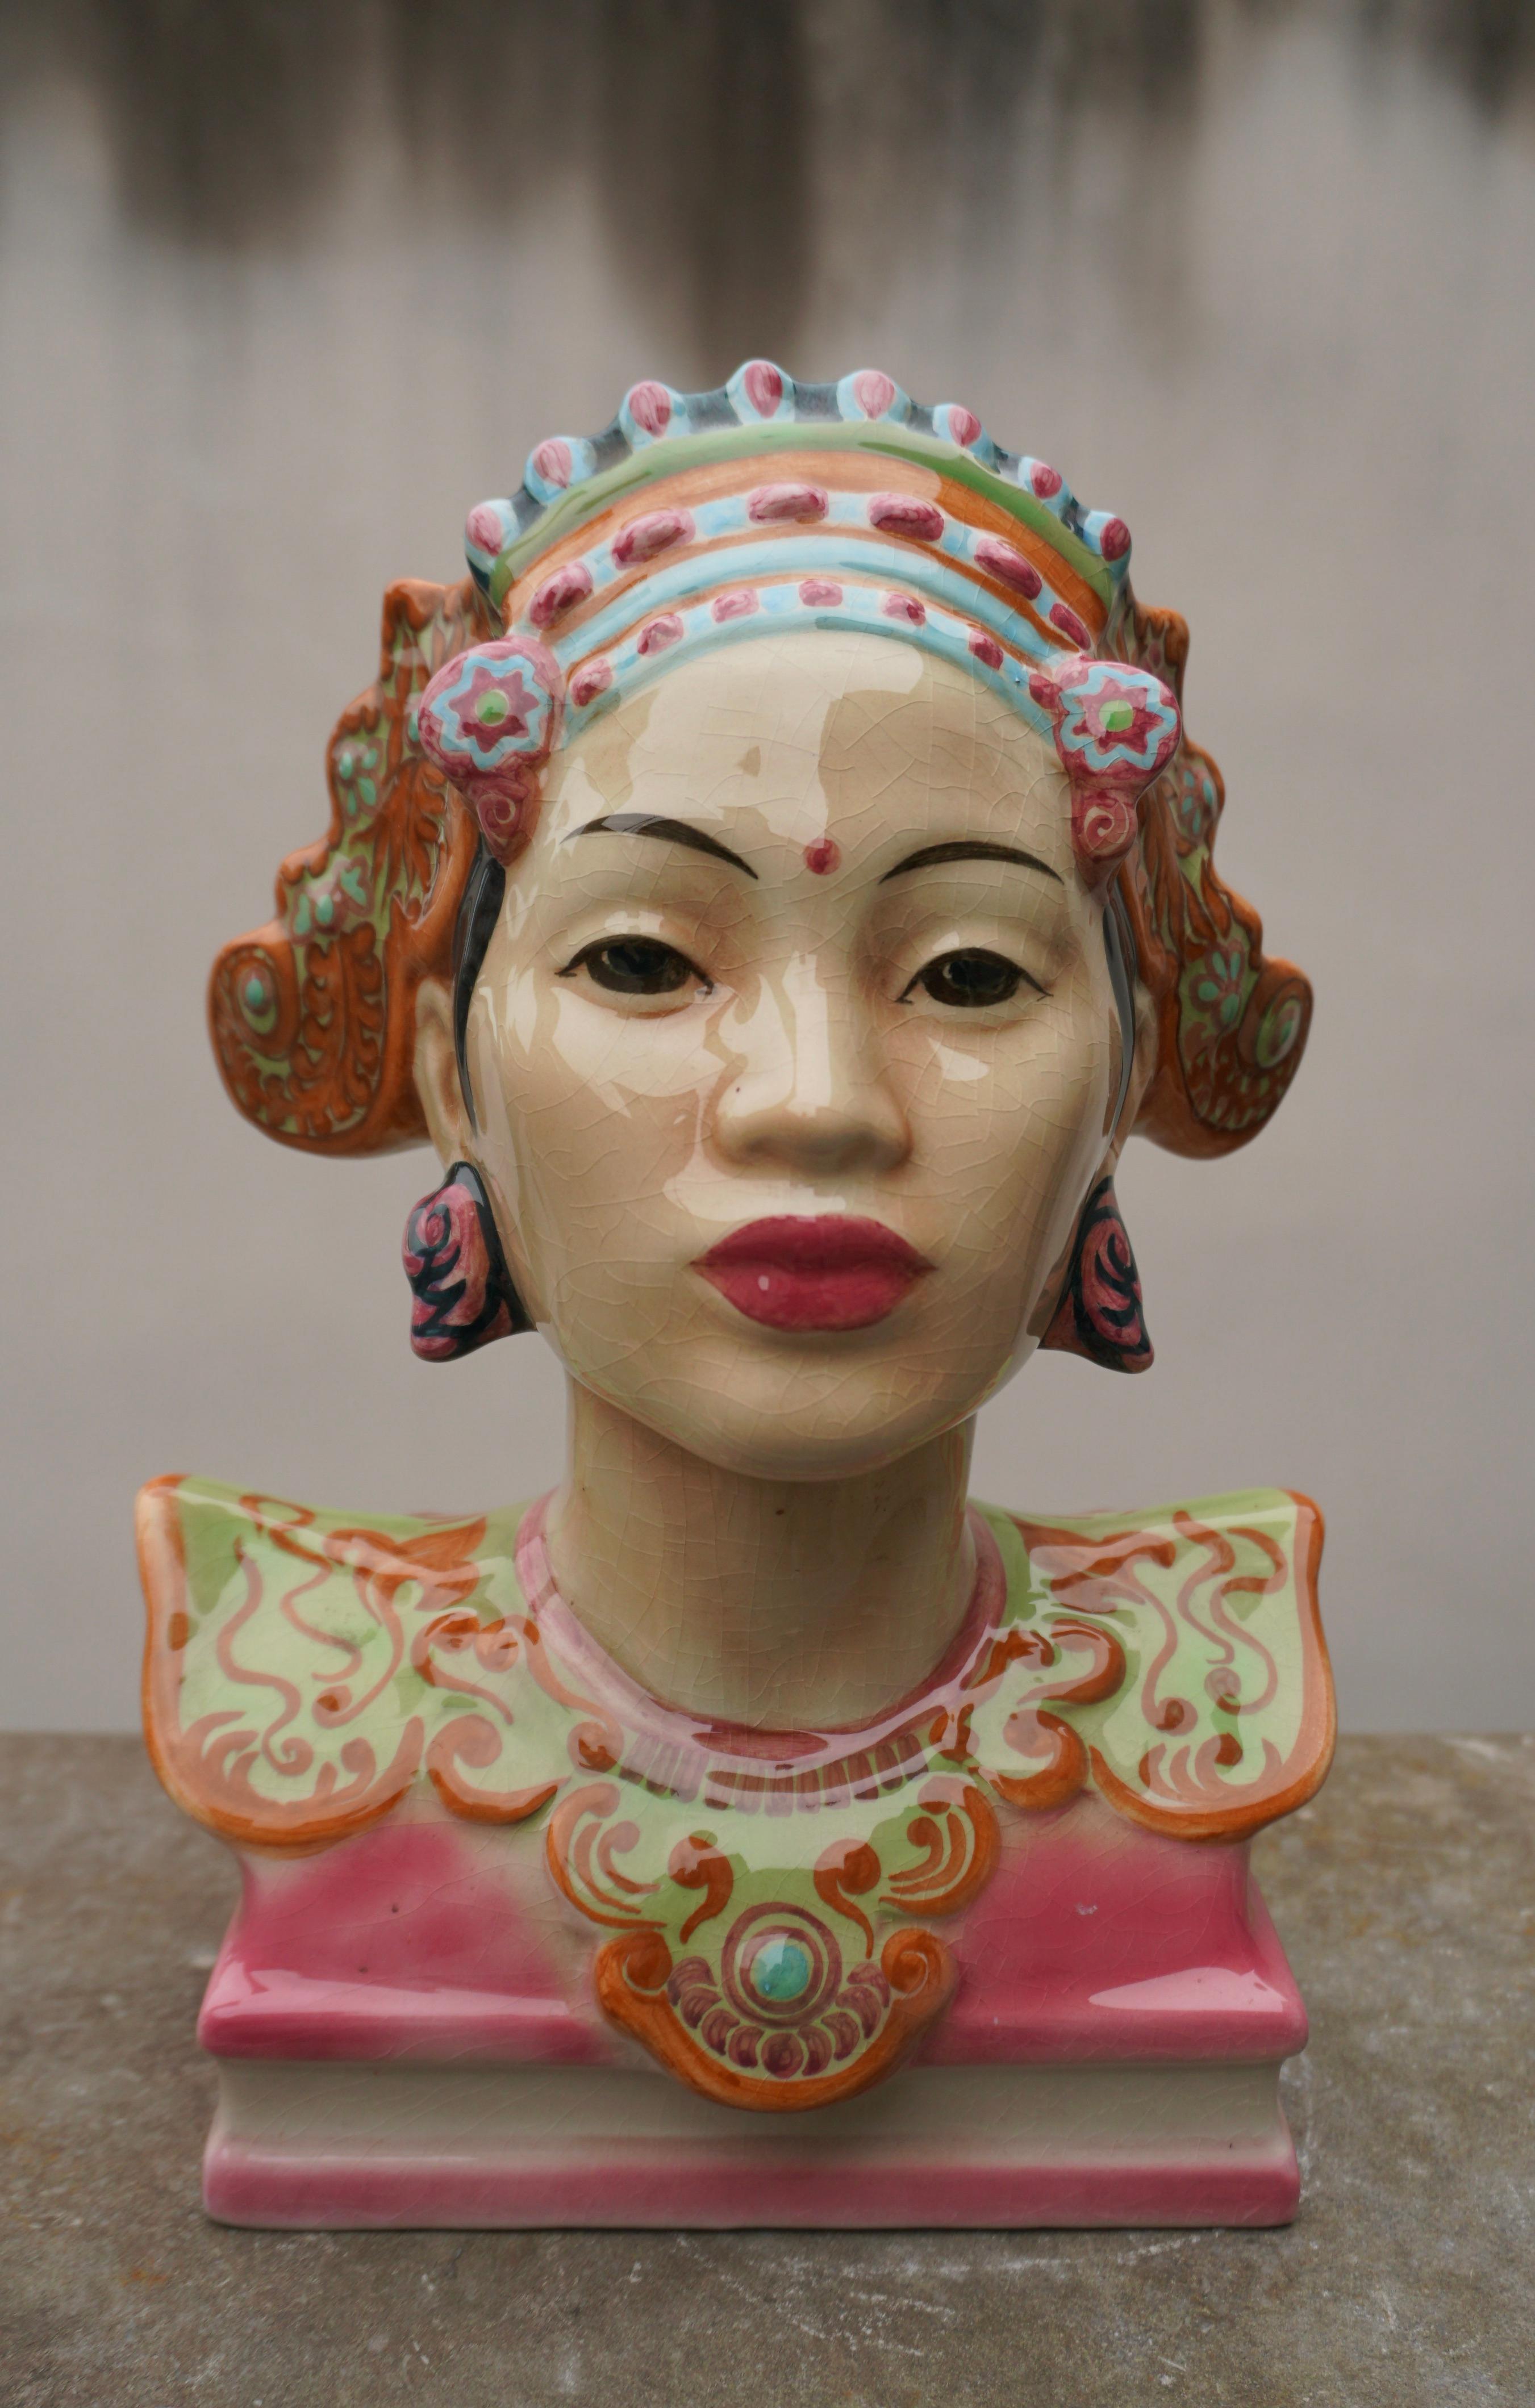 A highly Art Deco style decorative pottery bust of a Balinese dancer in striking colors by the designer Helen Liedloff, who named it 